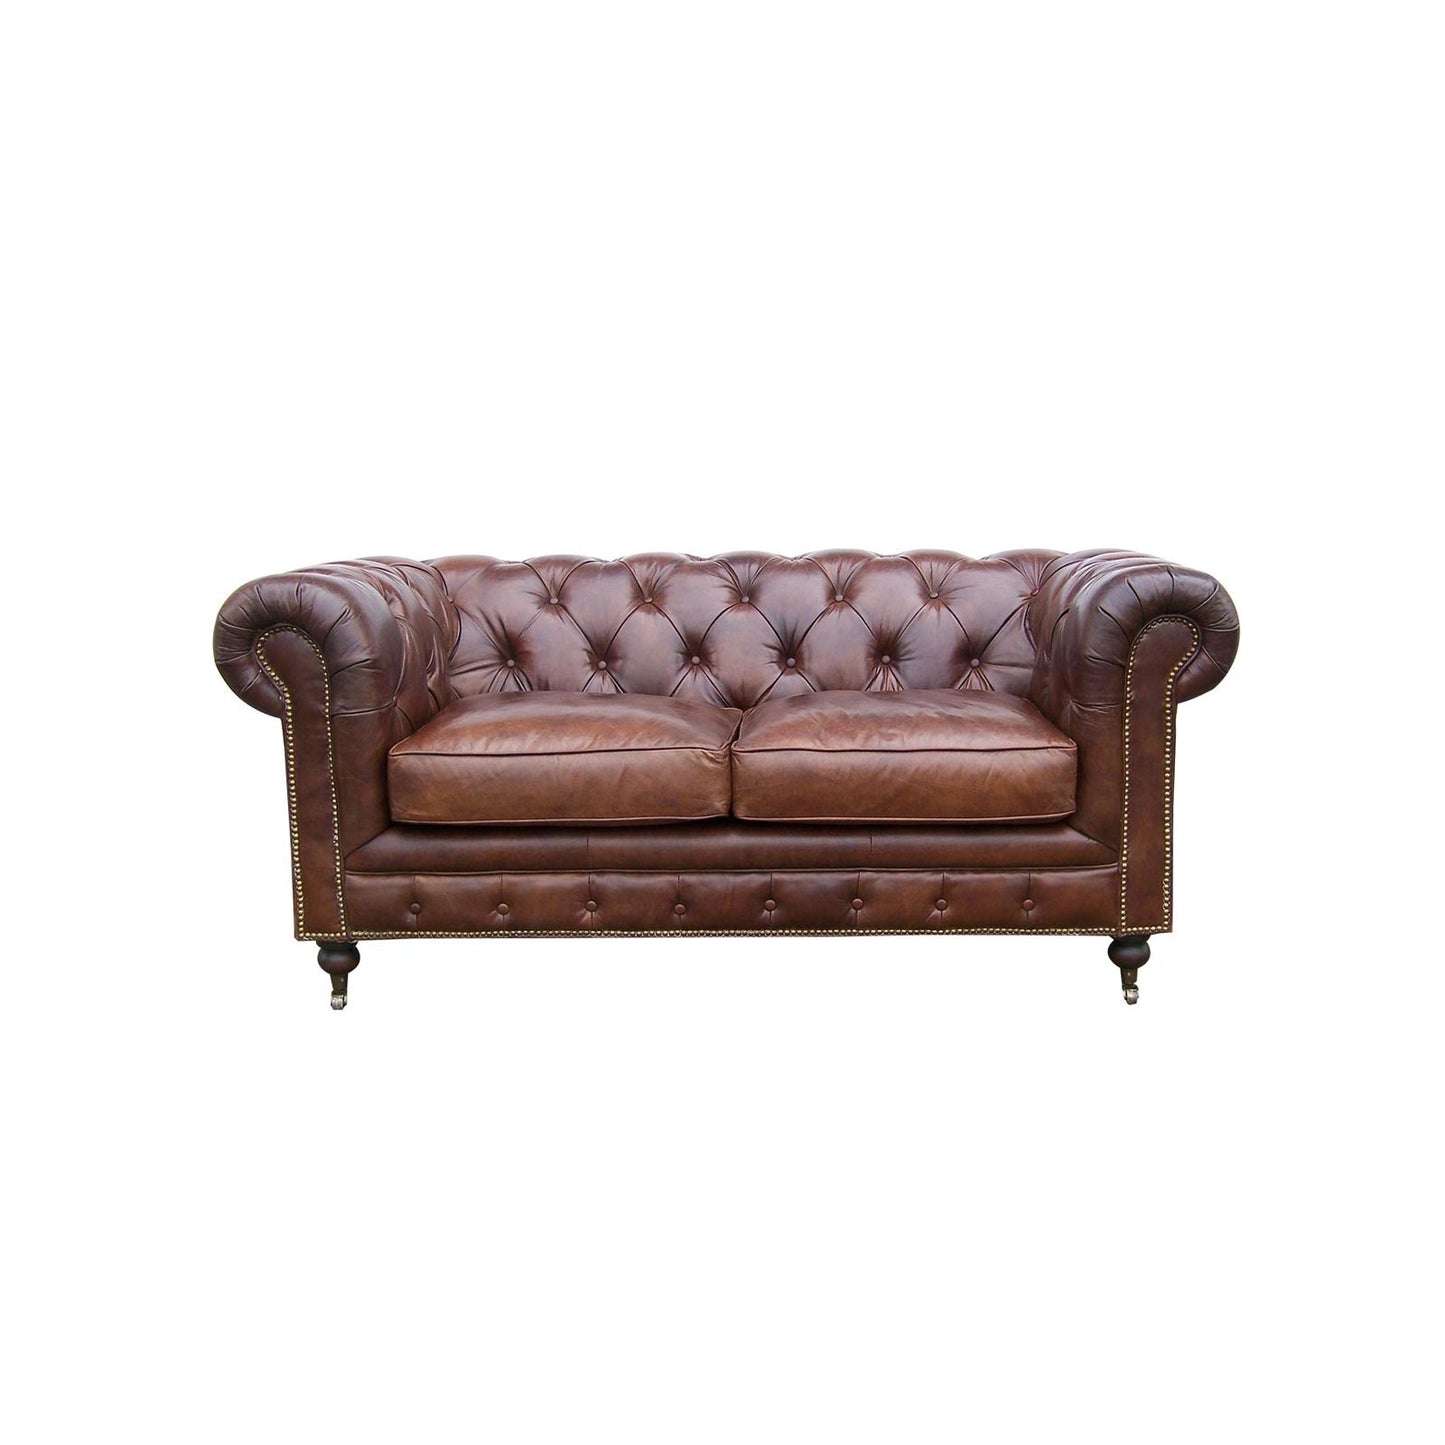 Canapé Chesterfield « Cigarre », 2 places